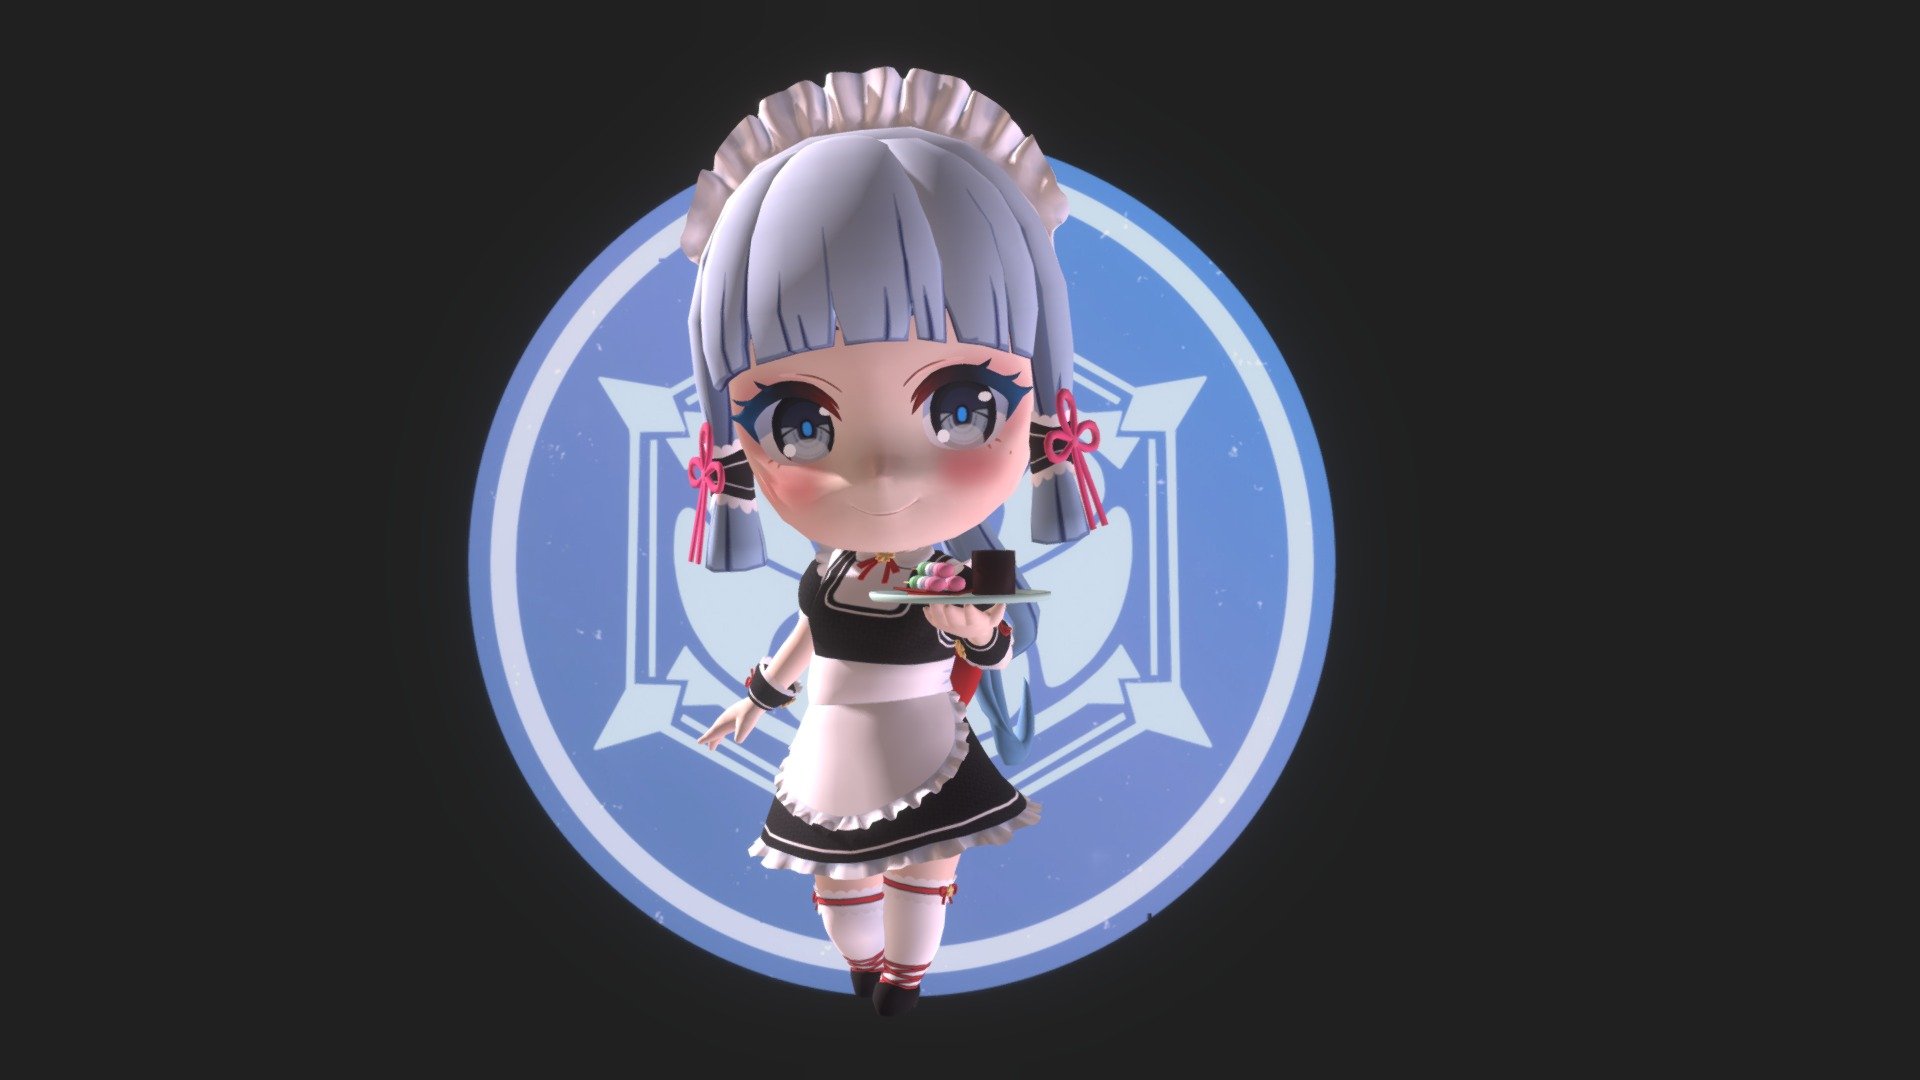 Hi all, this is my fanart of Kamisato Ayaka from Genshin Impact. This is her preview of her maid outfit. This outfit is fan-made by me and is 1 of the 4 outfits in the Ayaka package. If you like to purchase Ayaka package, you can head over to her default outfit and purchase it. Hope you like it 3d model